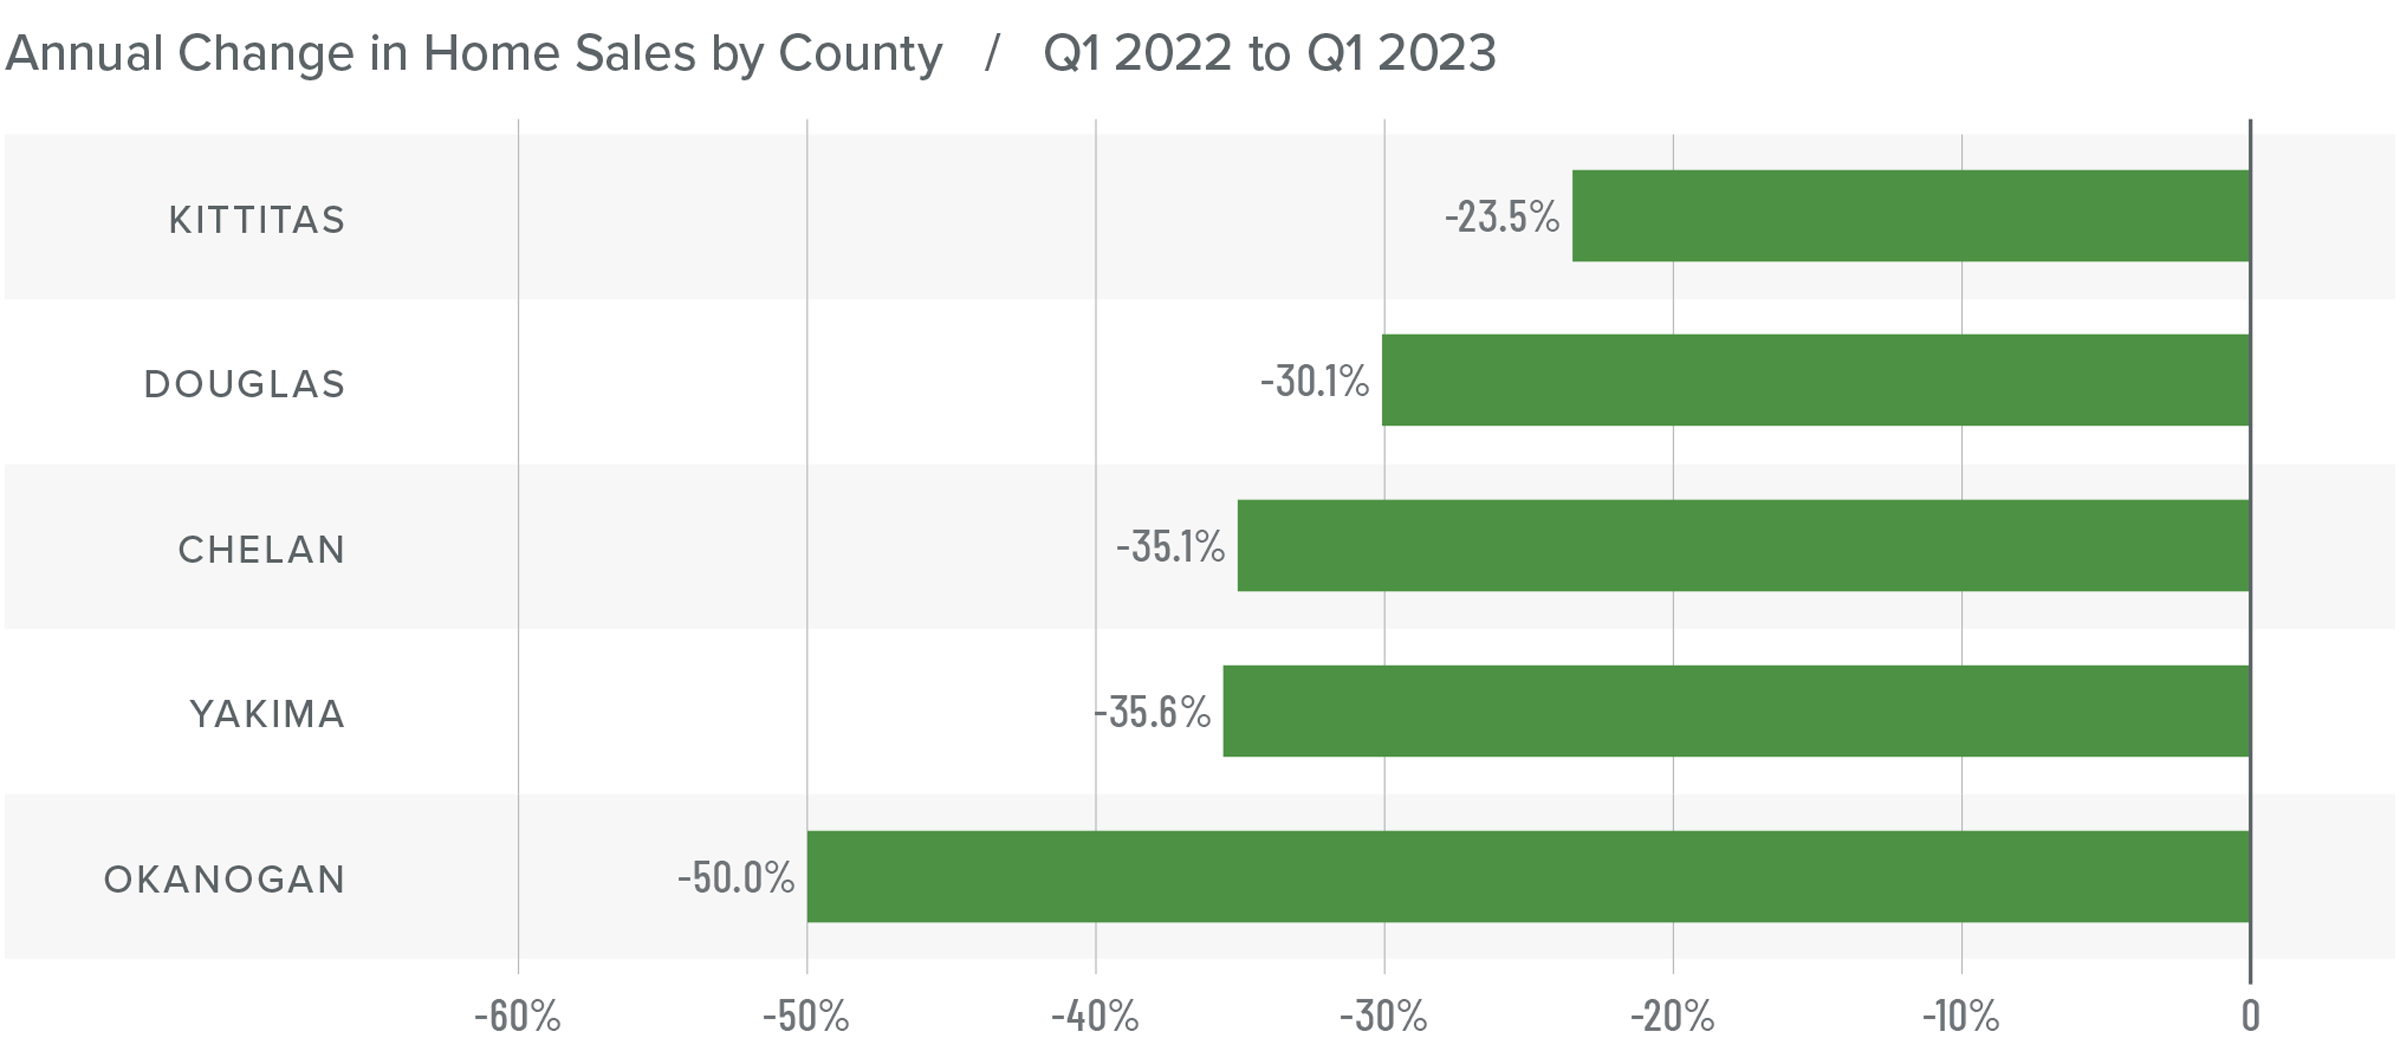 A bar graph showing the annual change in home sales for various counties in Central Washington from Q1 2022 to Q1 2023. All counties have a negative percentage year-over-year change. Here are the totals: Kittitas at -23.5%, Douglas at -30.1%, Chelan -35.1%, Yakima -35.6%, and Okanogan -50%.